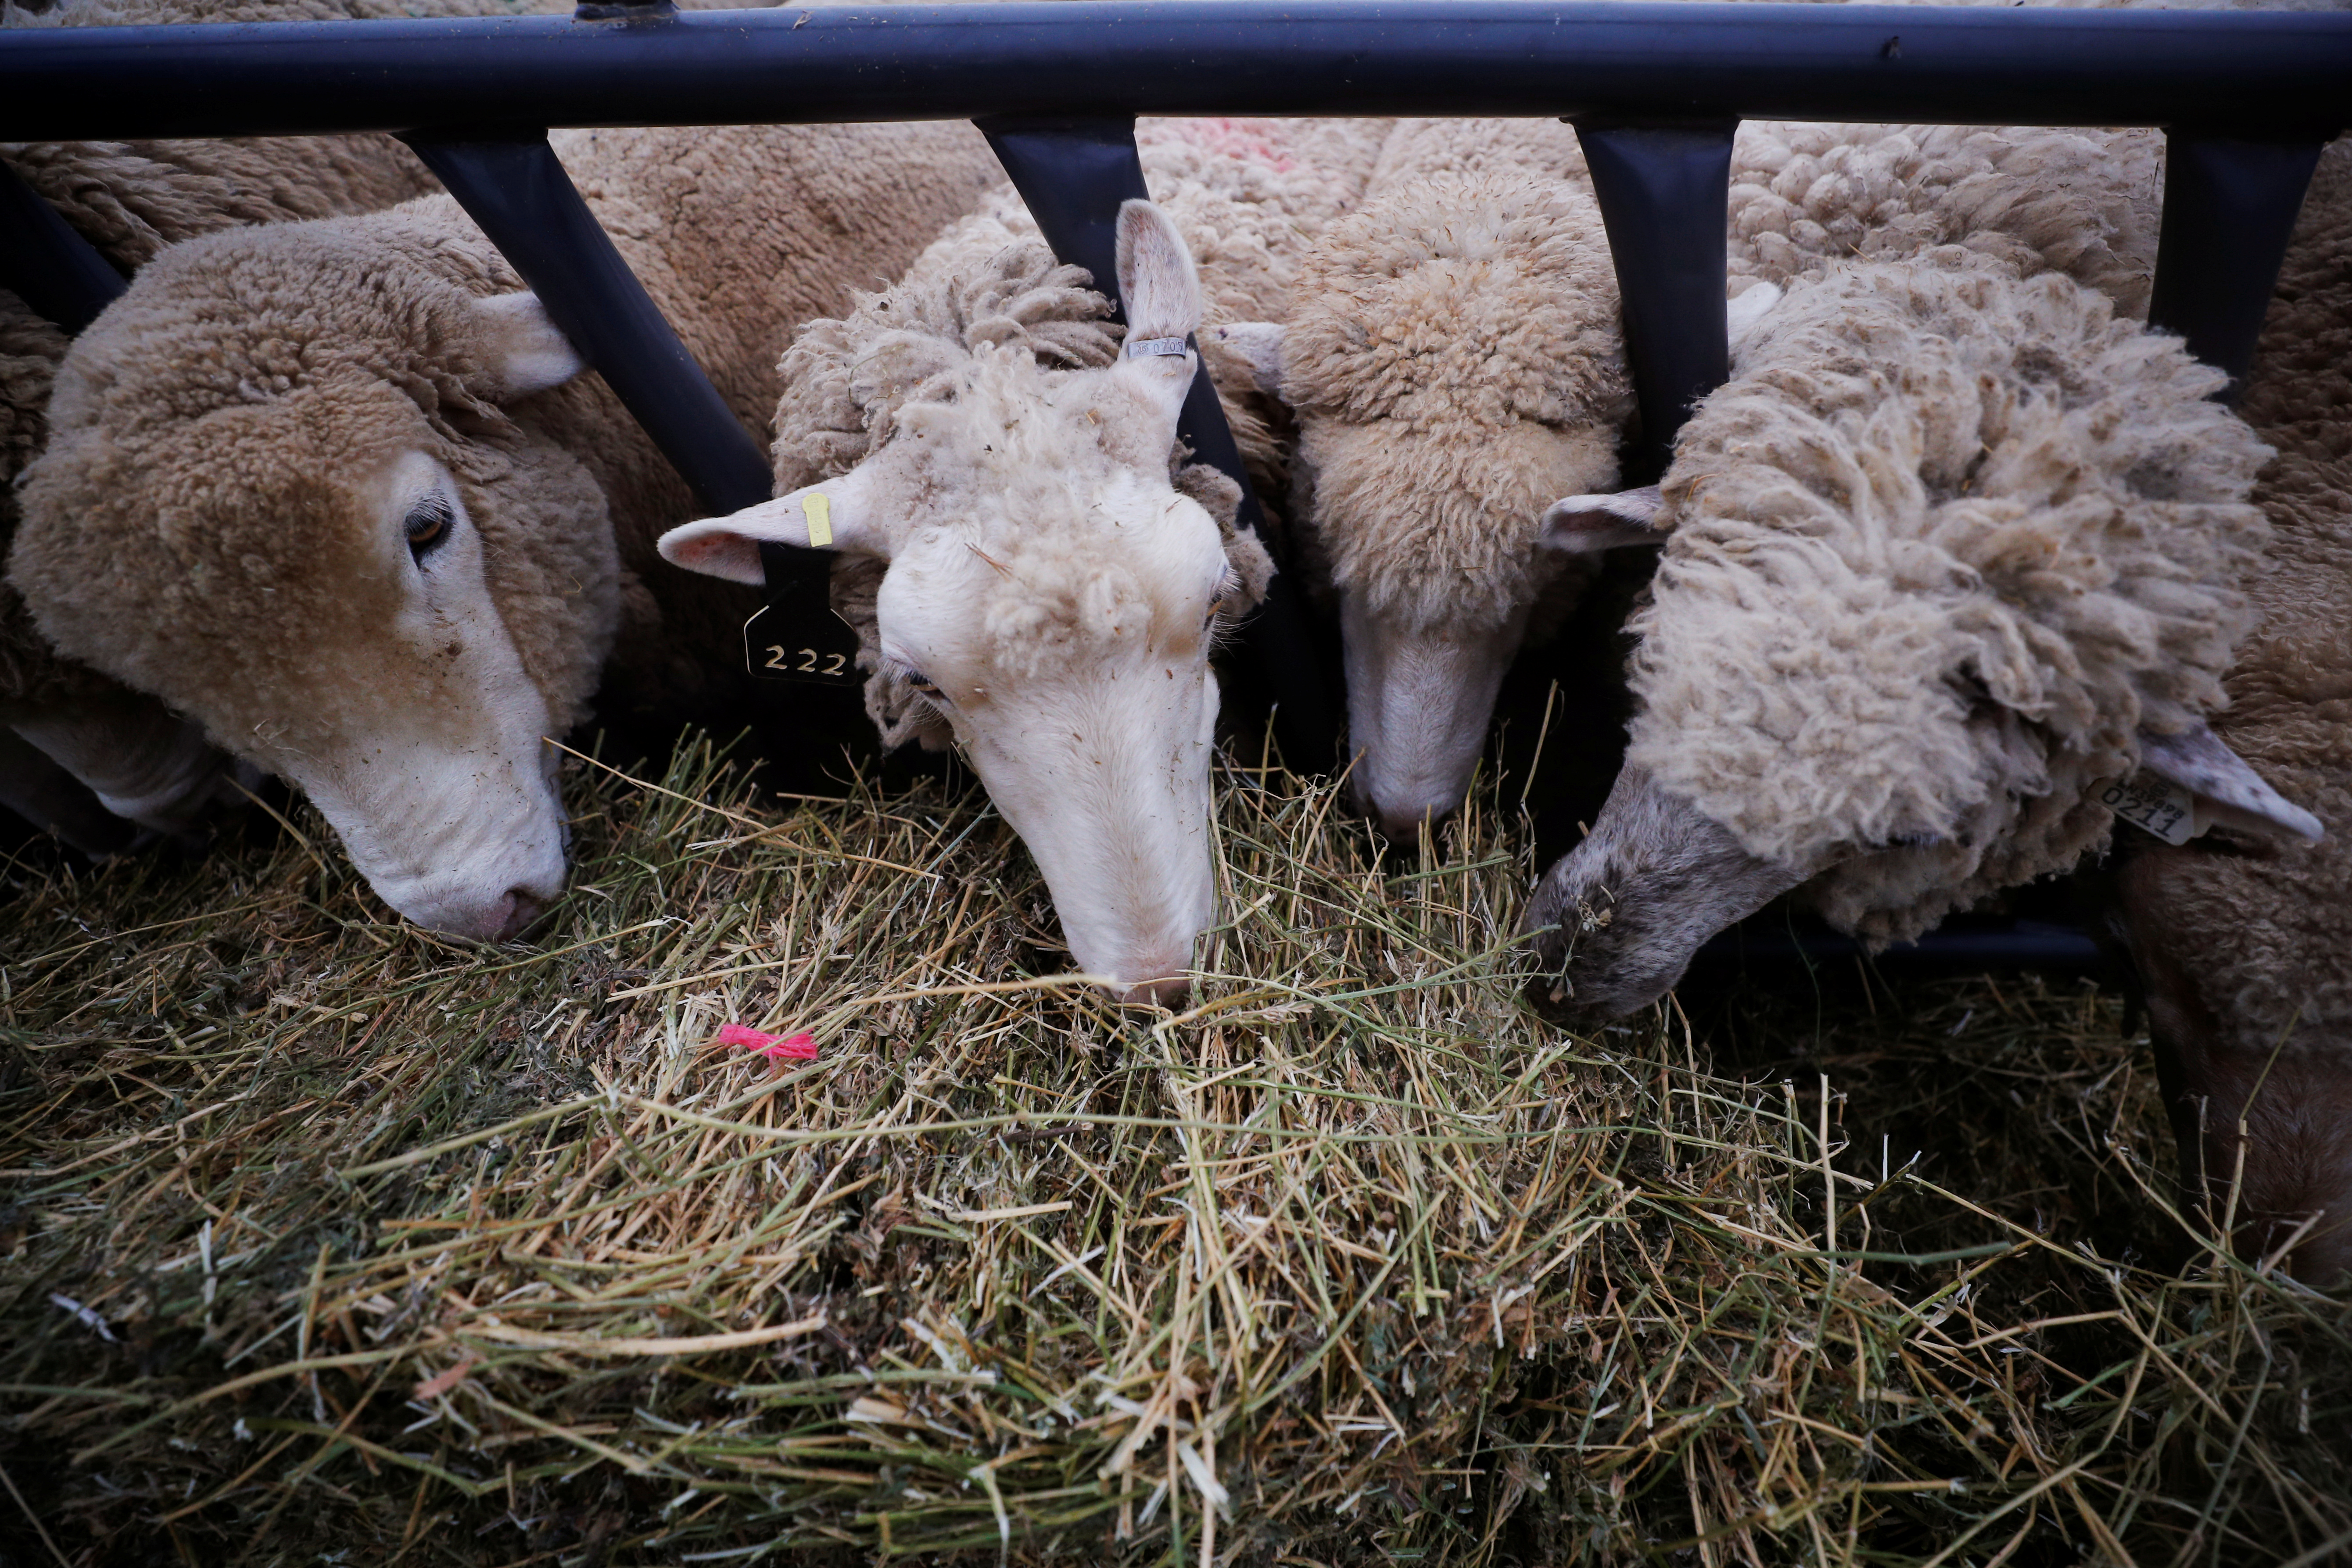 Sheep eat in their enclosure at the Iowa State Fair in Des Moines